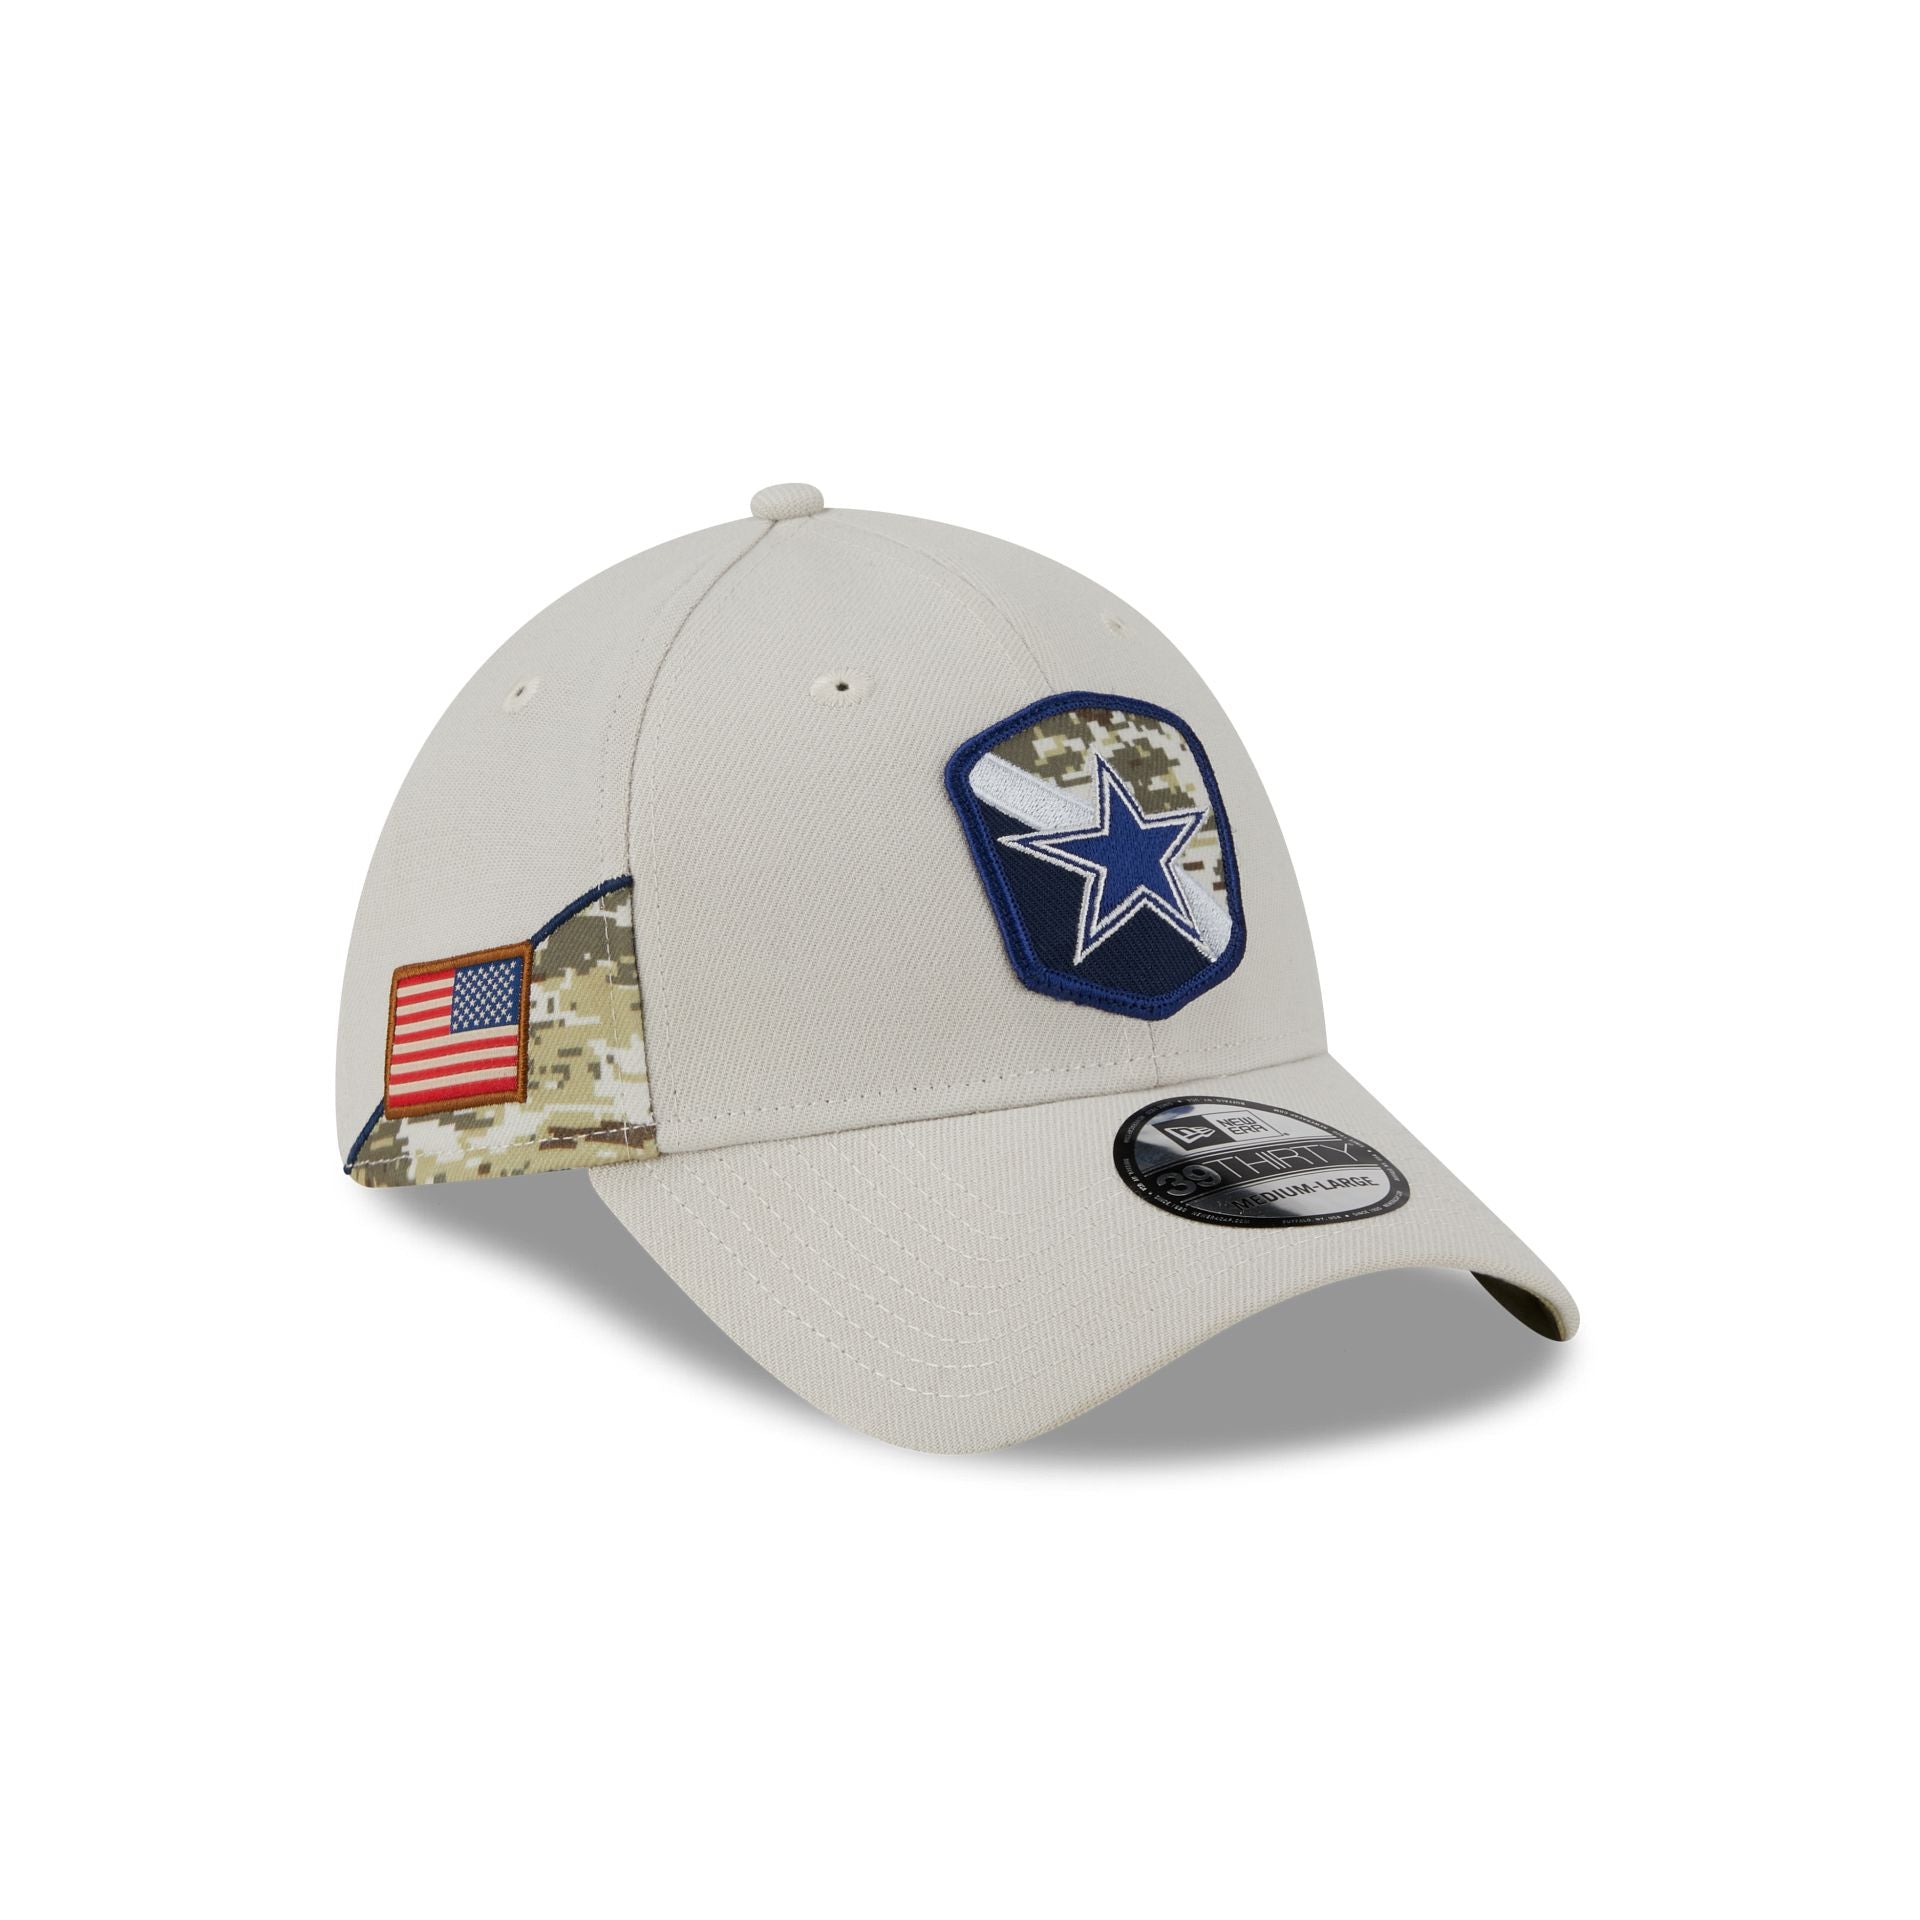 Dallas Cowboys Salute to Service Collection, how to buy